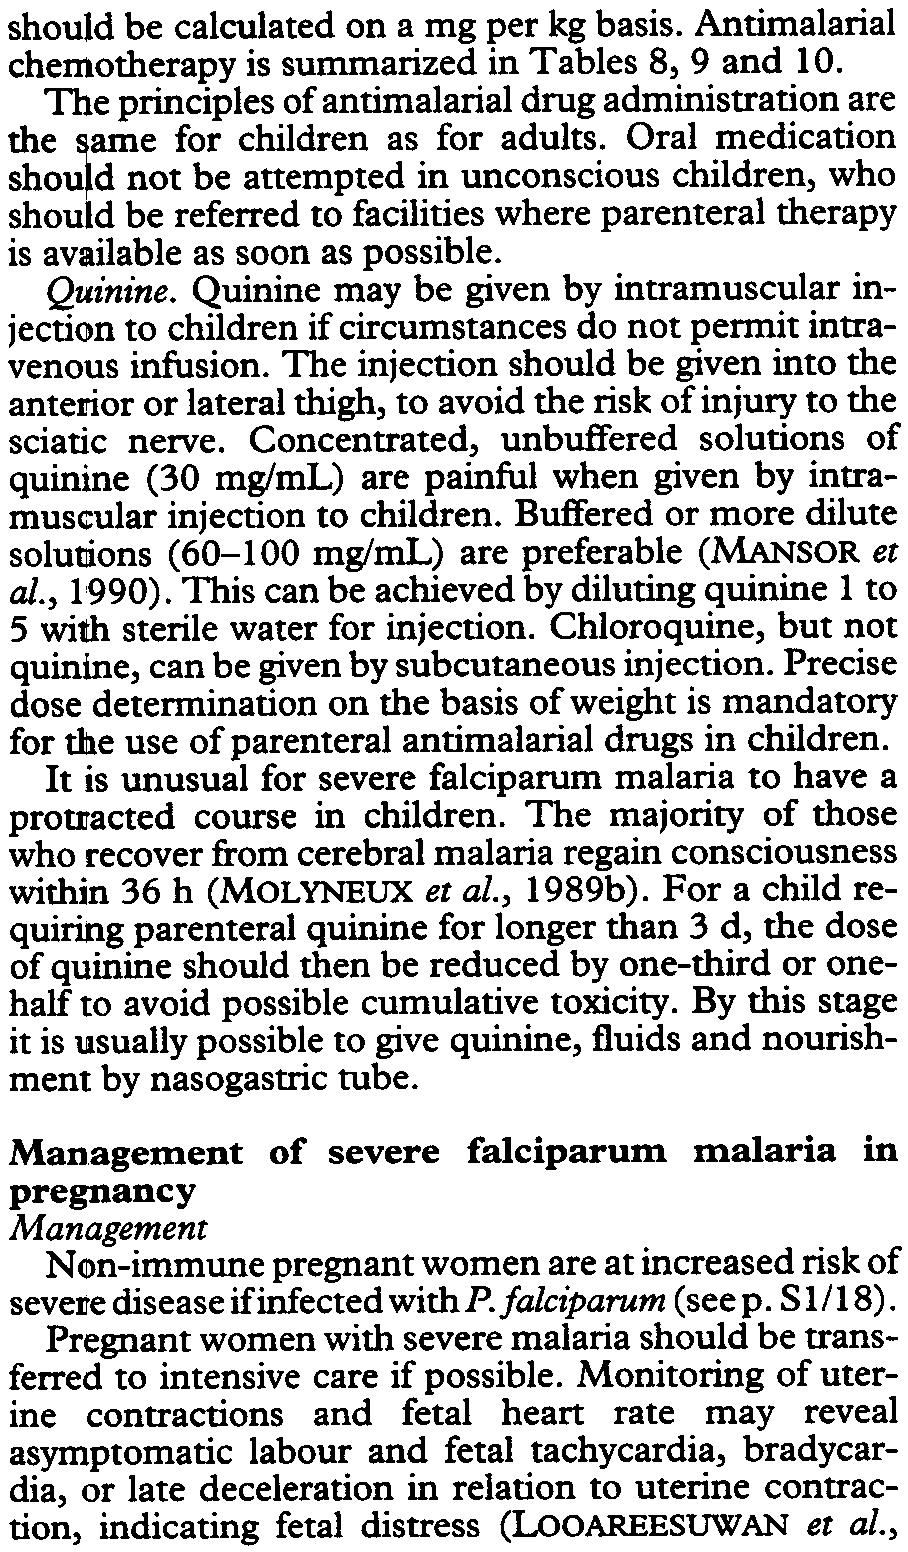 Oral medication should not be attempted in unconscious children, who should be referred to facilities where parenteral therapy is available as soon as possible. Quinine.